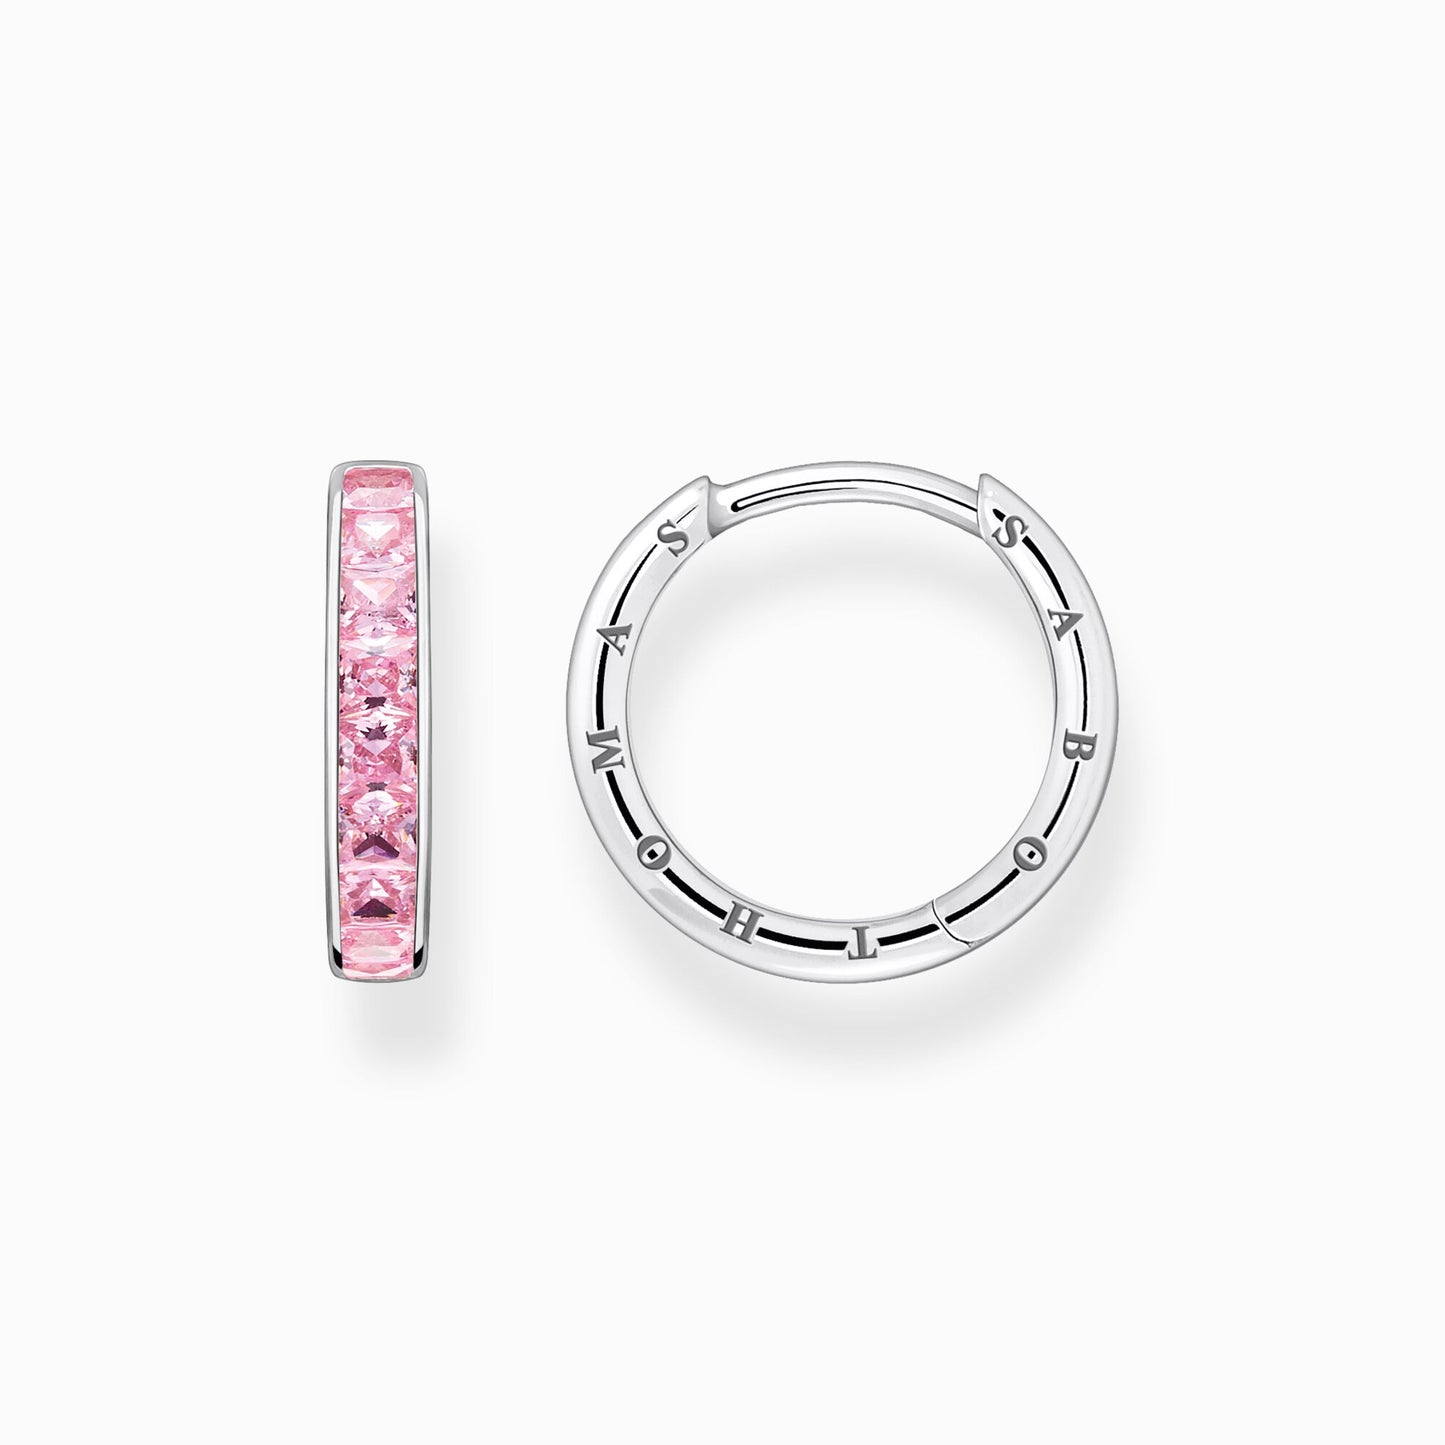 Thomas Sabo Hoop Earrings With Pink Stones Pavé Silver CR668-051-9